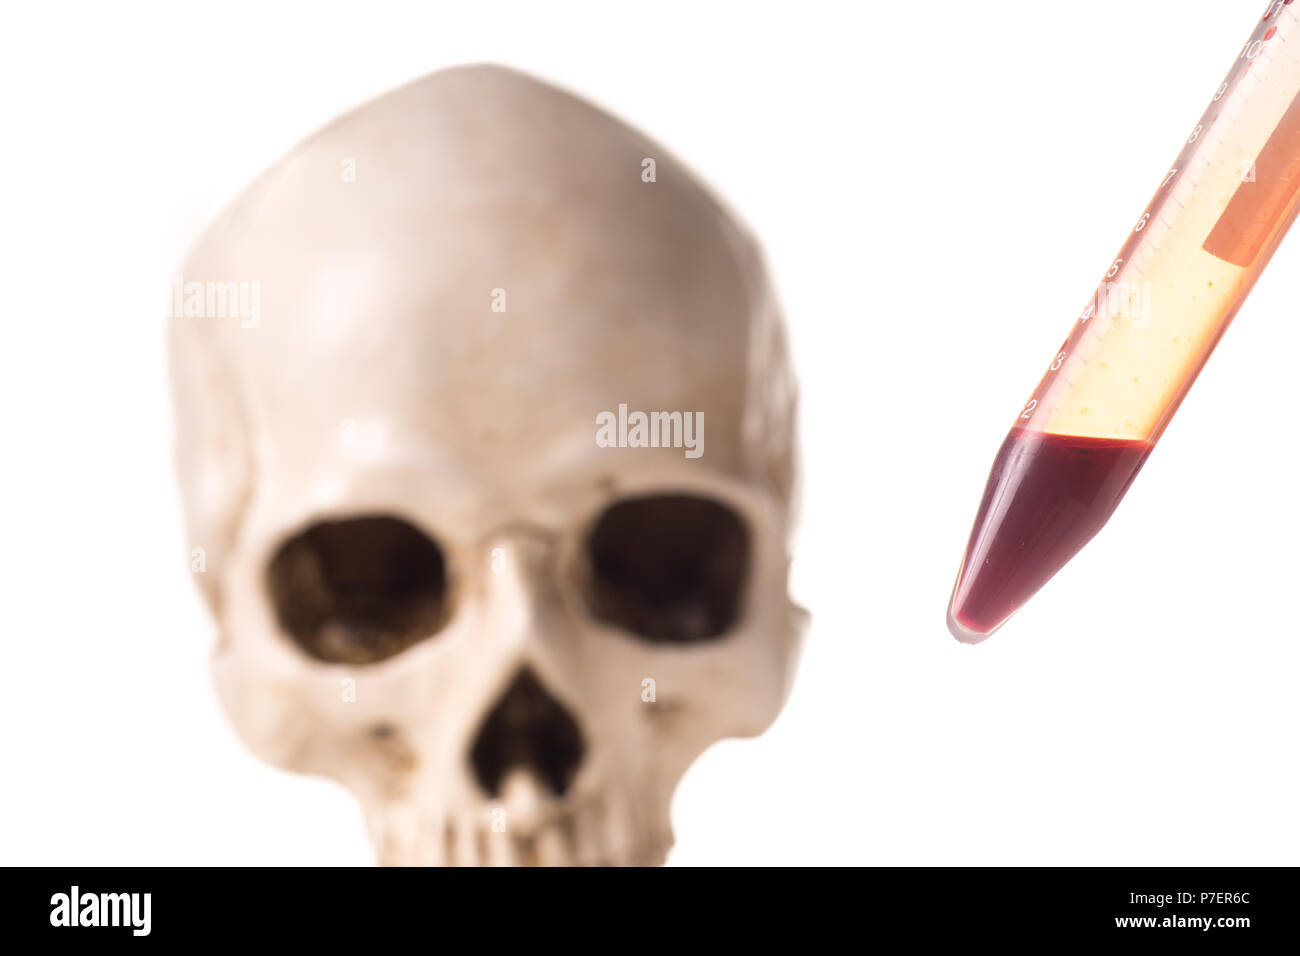 Blood sample or test tube with red liquid and blurry skull isolated in white background Stock Photo